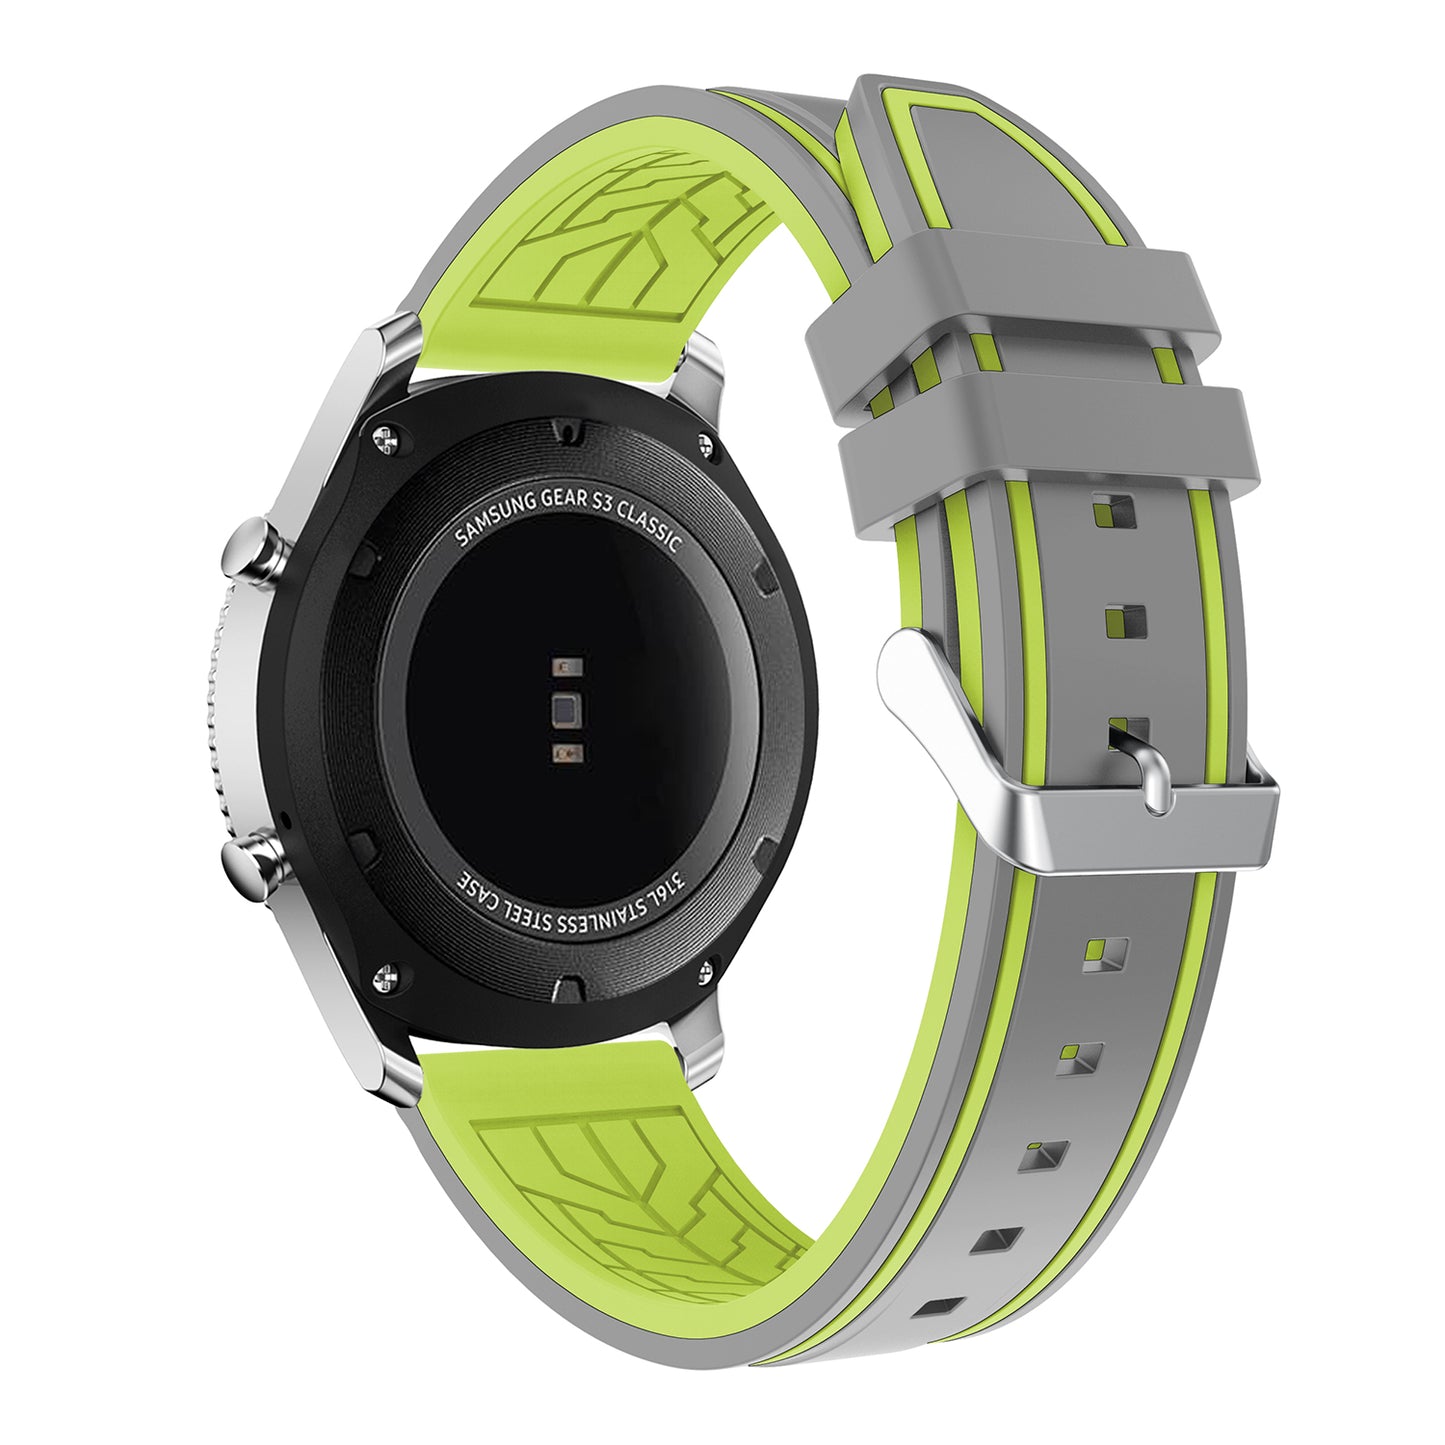 Rubber Strap for Samsung Gear S3 & Others